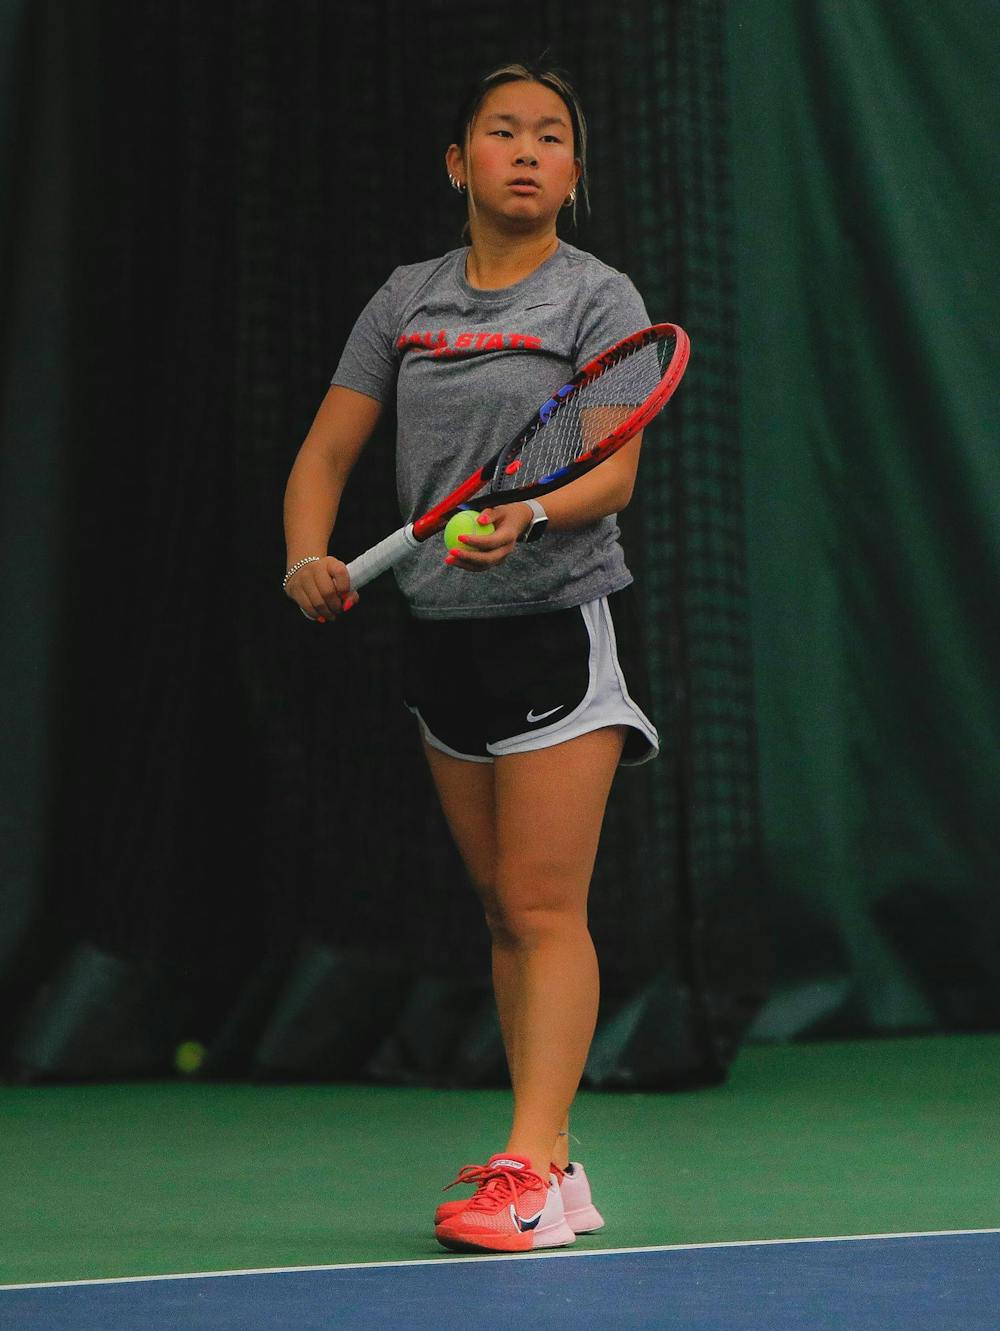 Ball State women's tennis loses its second match in a row, falling to Cleveland State